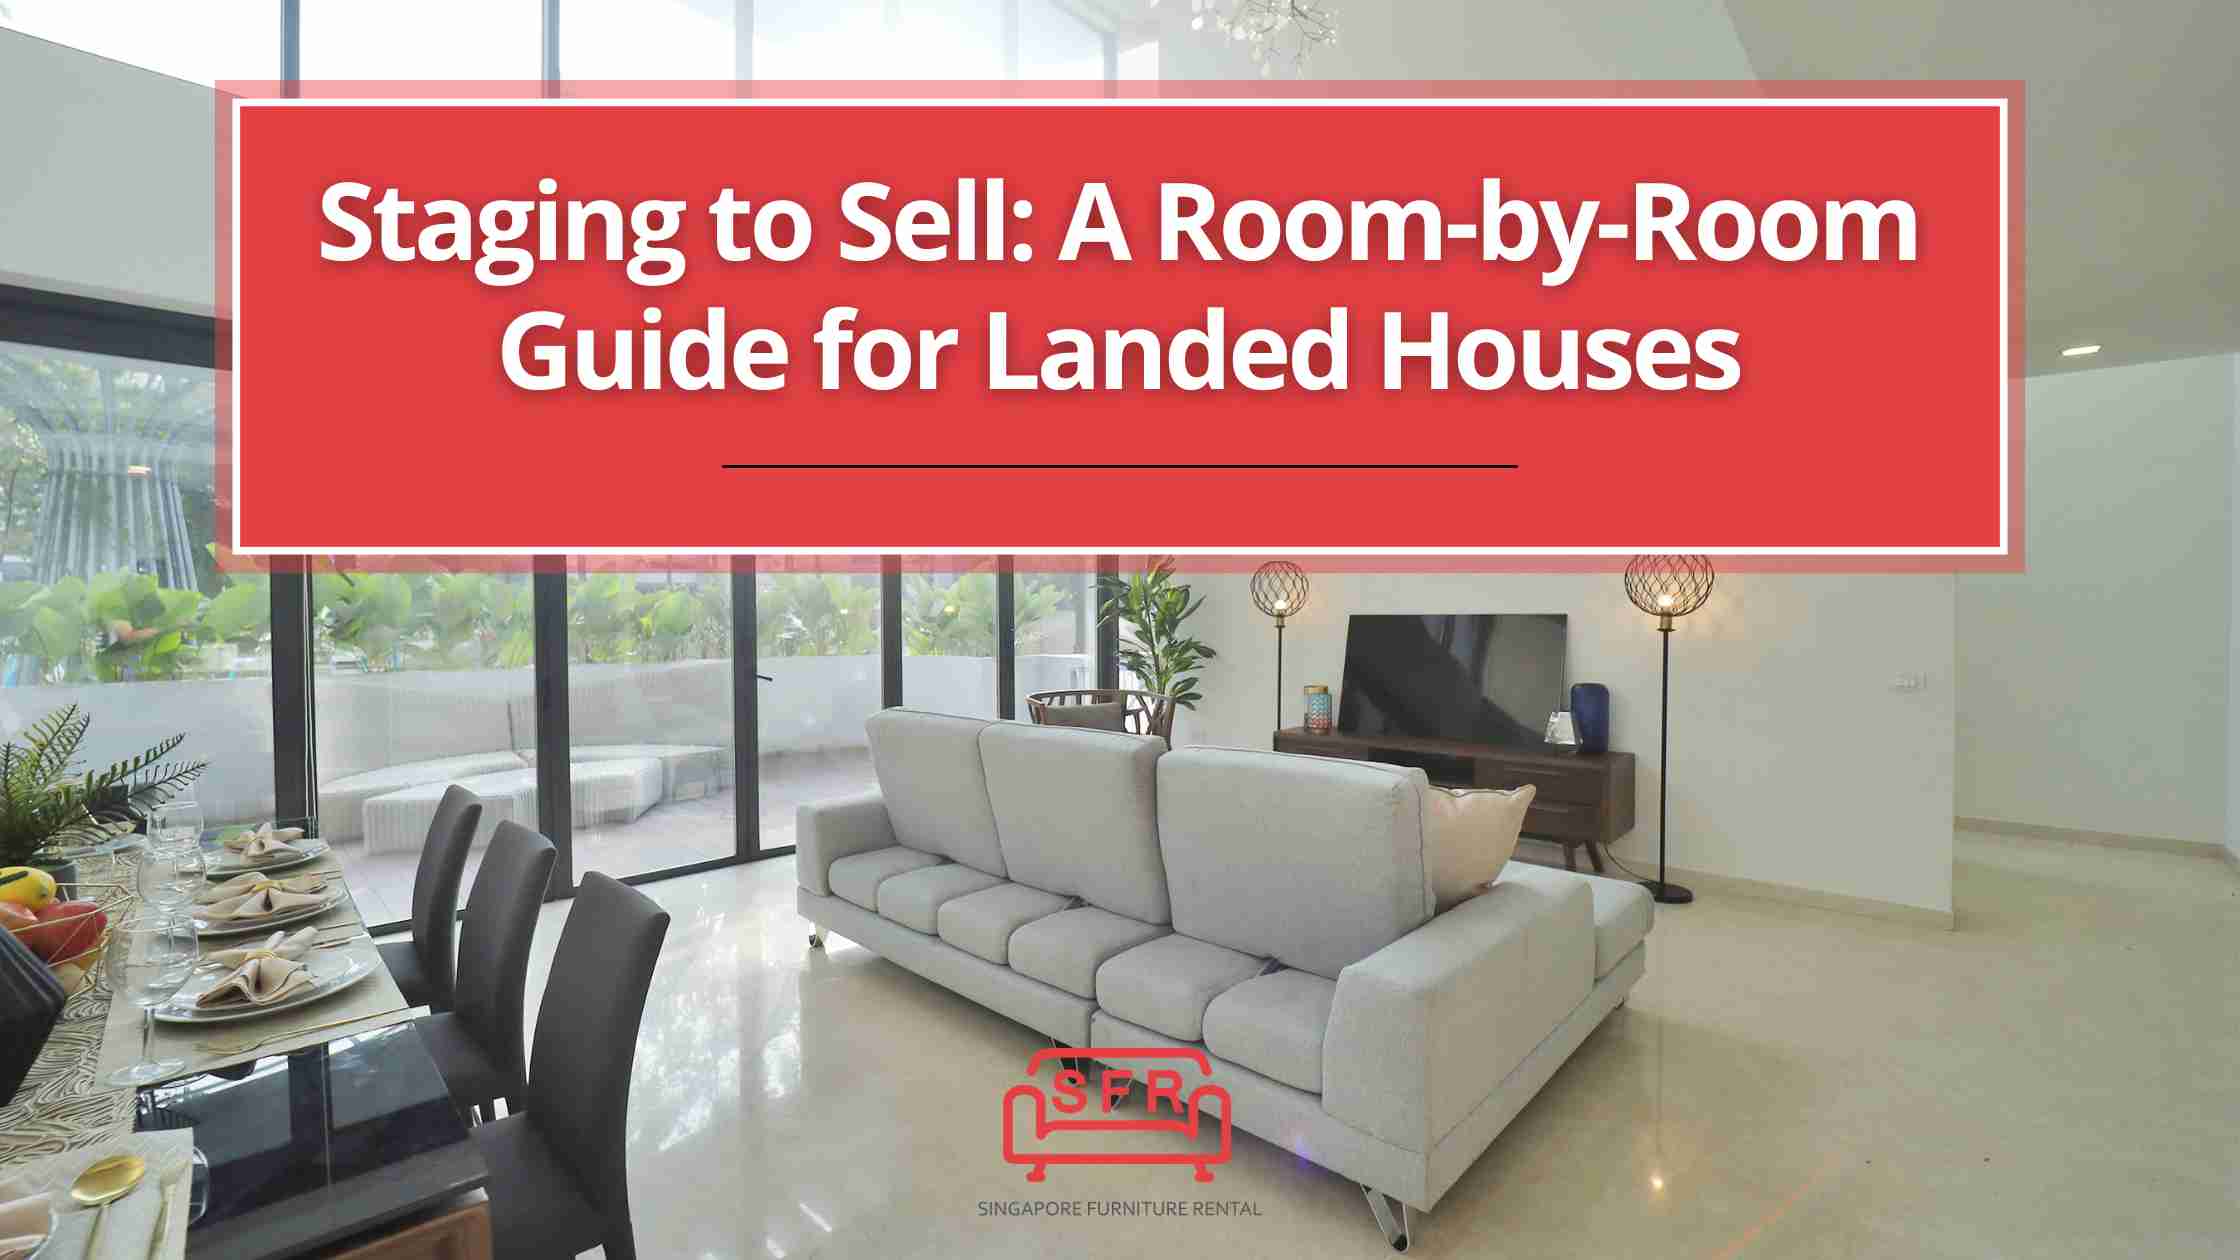 Staging to Sell A Room-by-Room Guide for Landed Houses